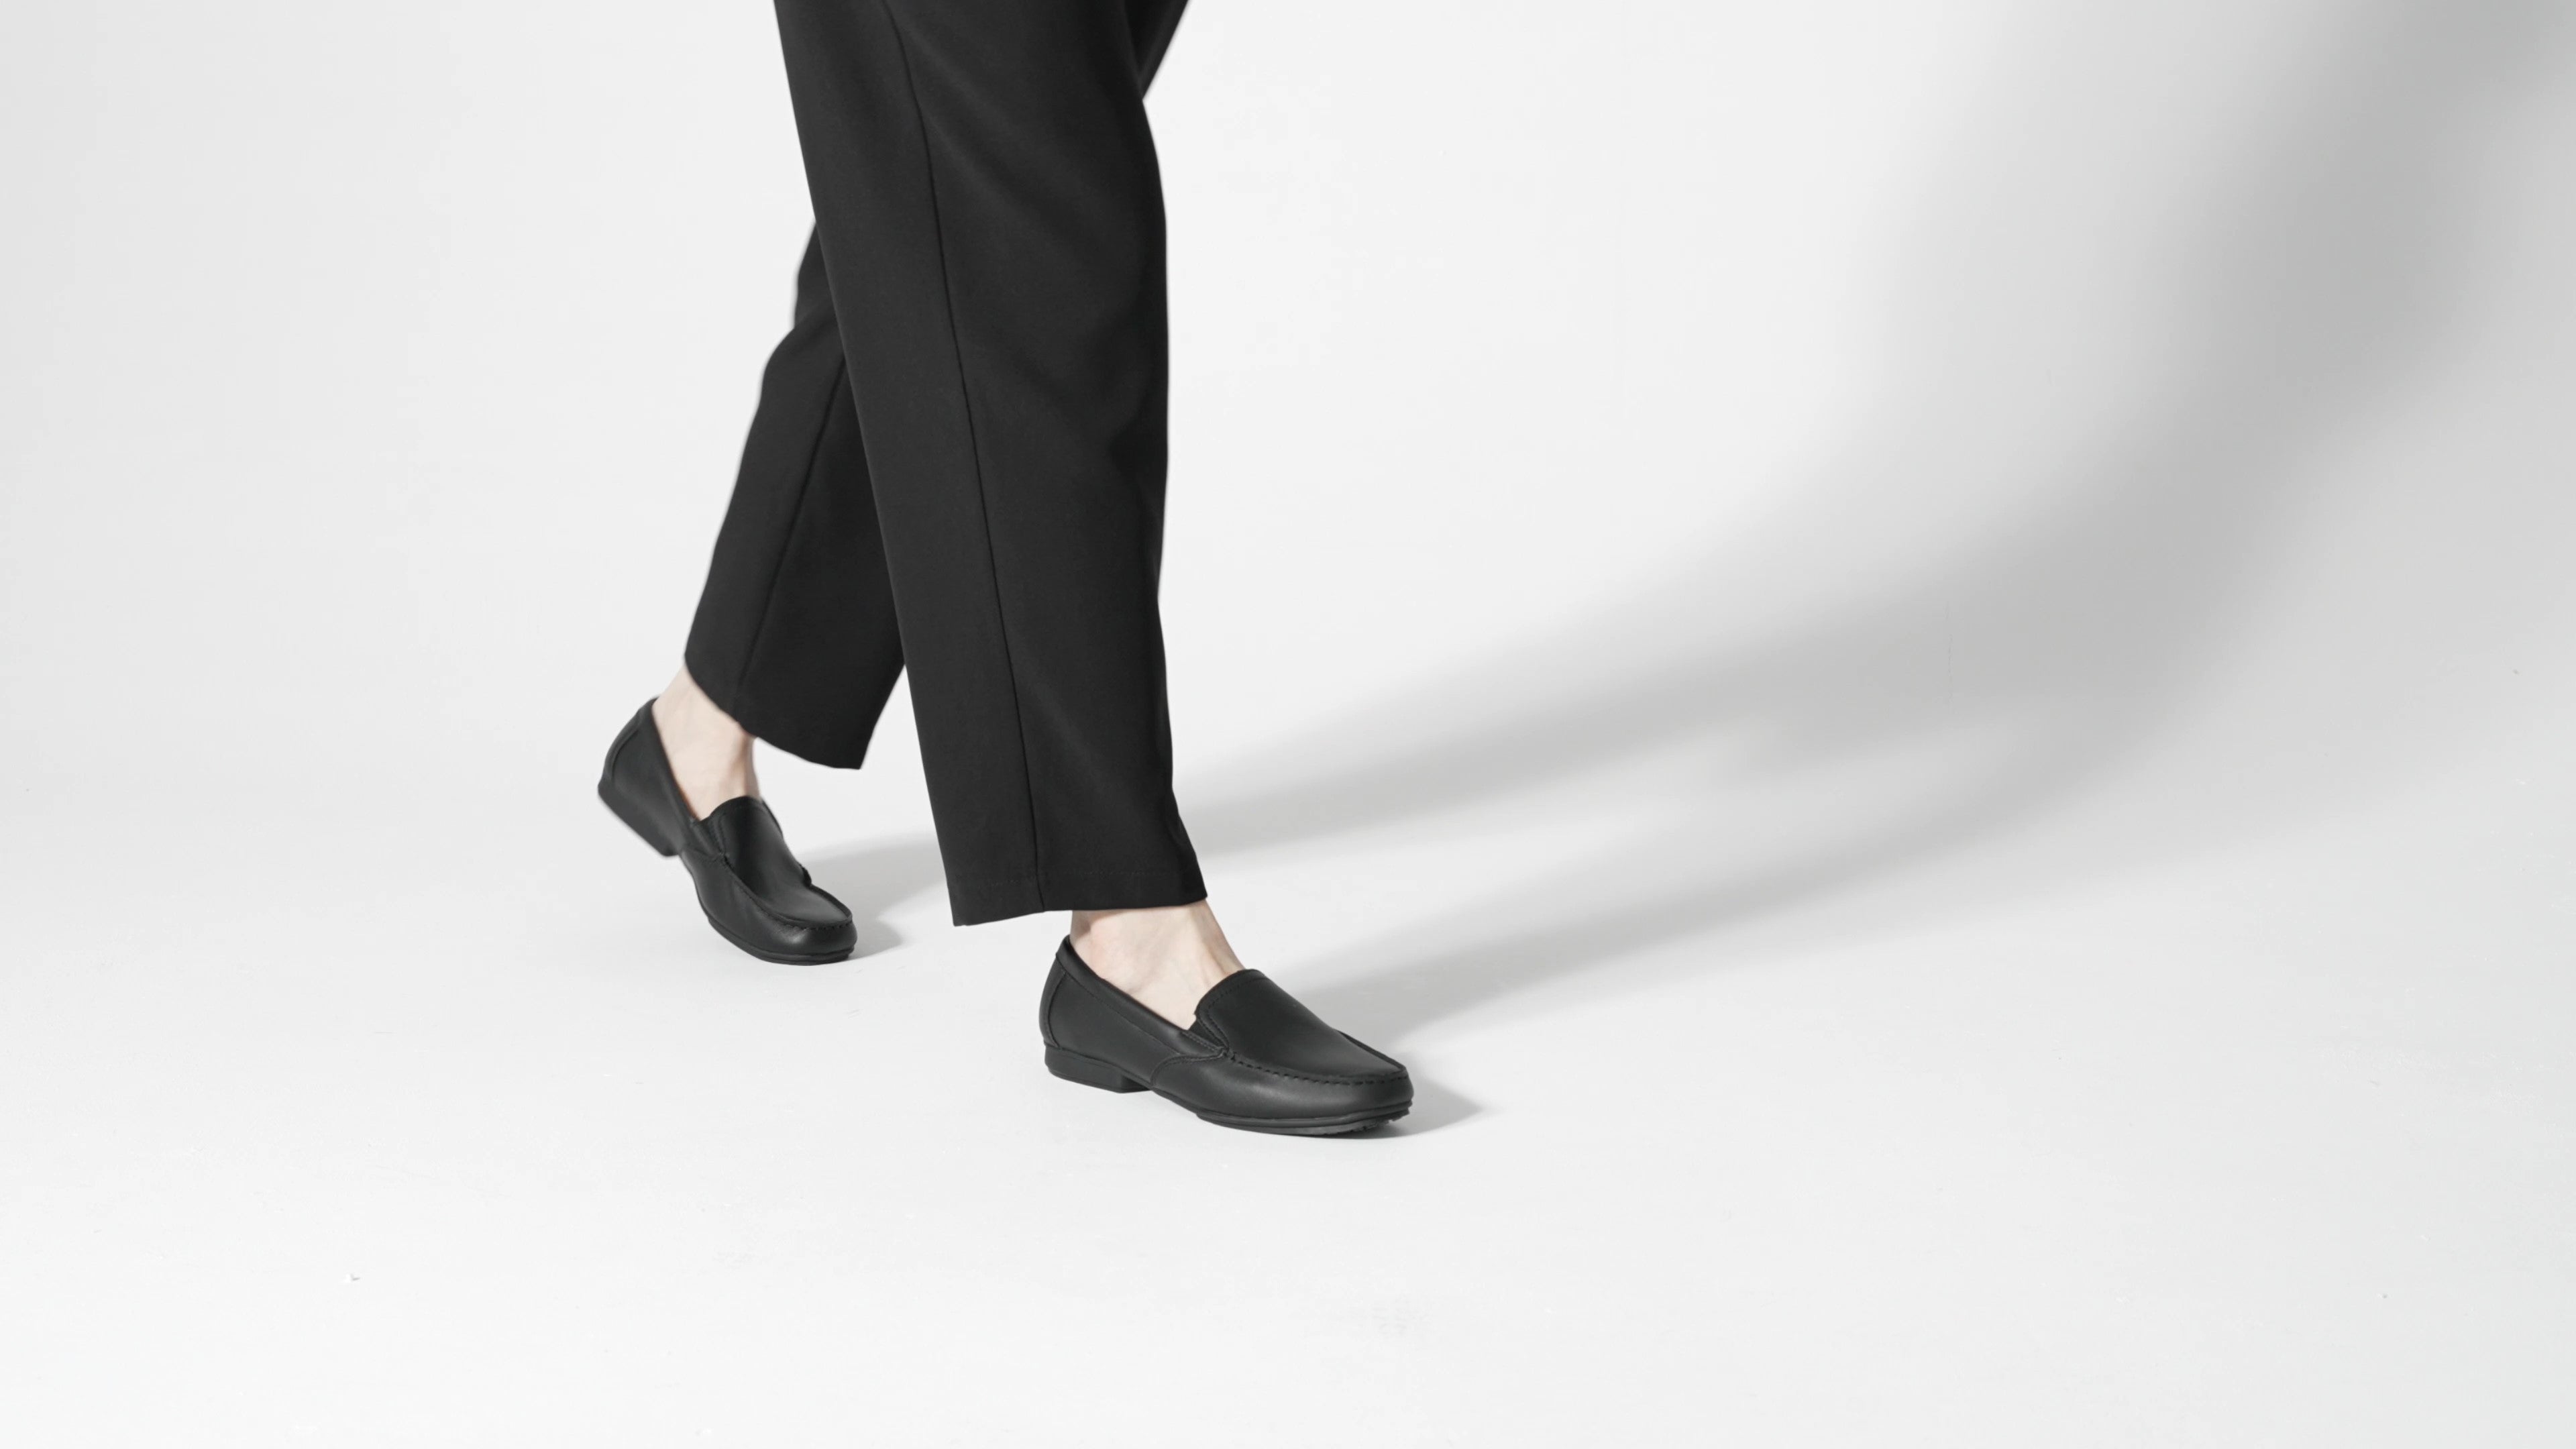 The Jenni from Shoes For Crews is a slip-on dress shoe, slip-resistant and designed to provide comfort throughout the working day, product video.